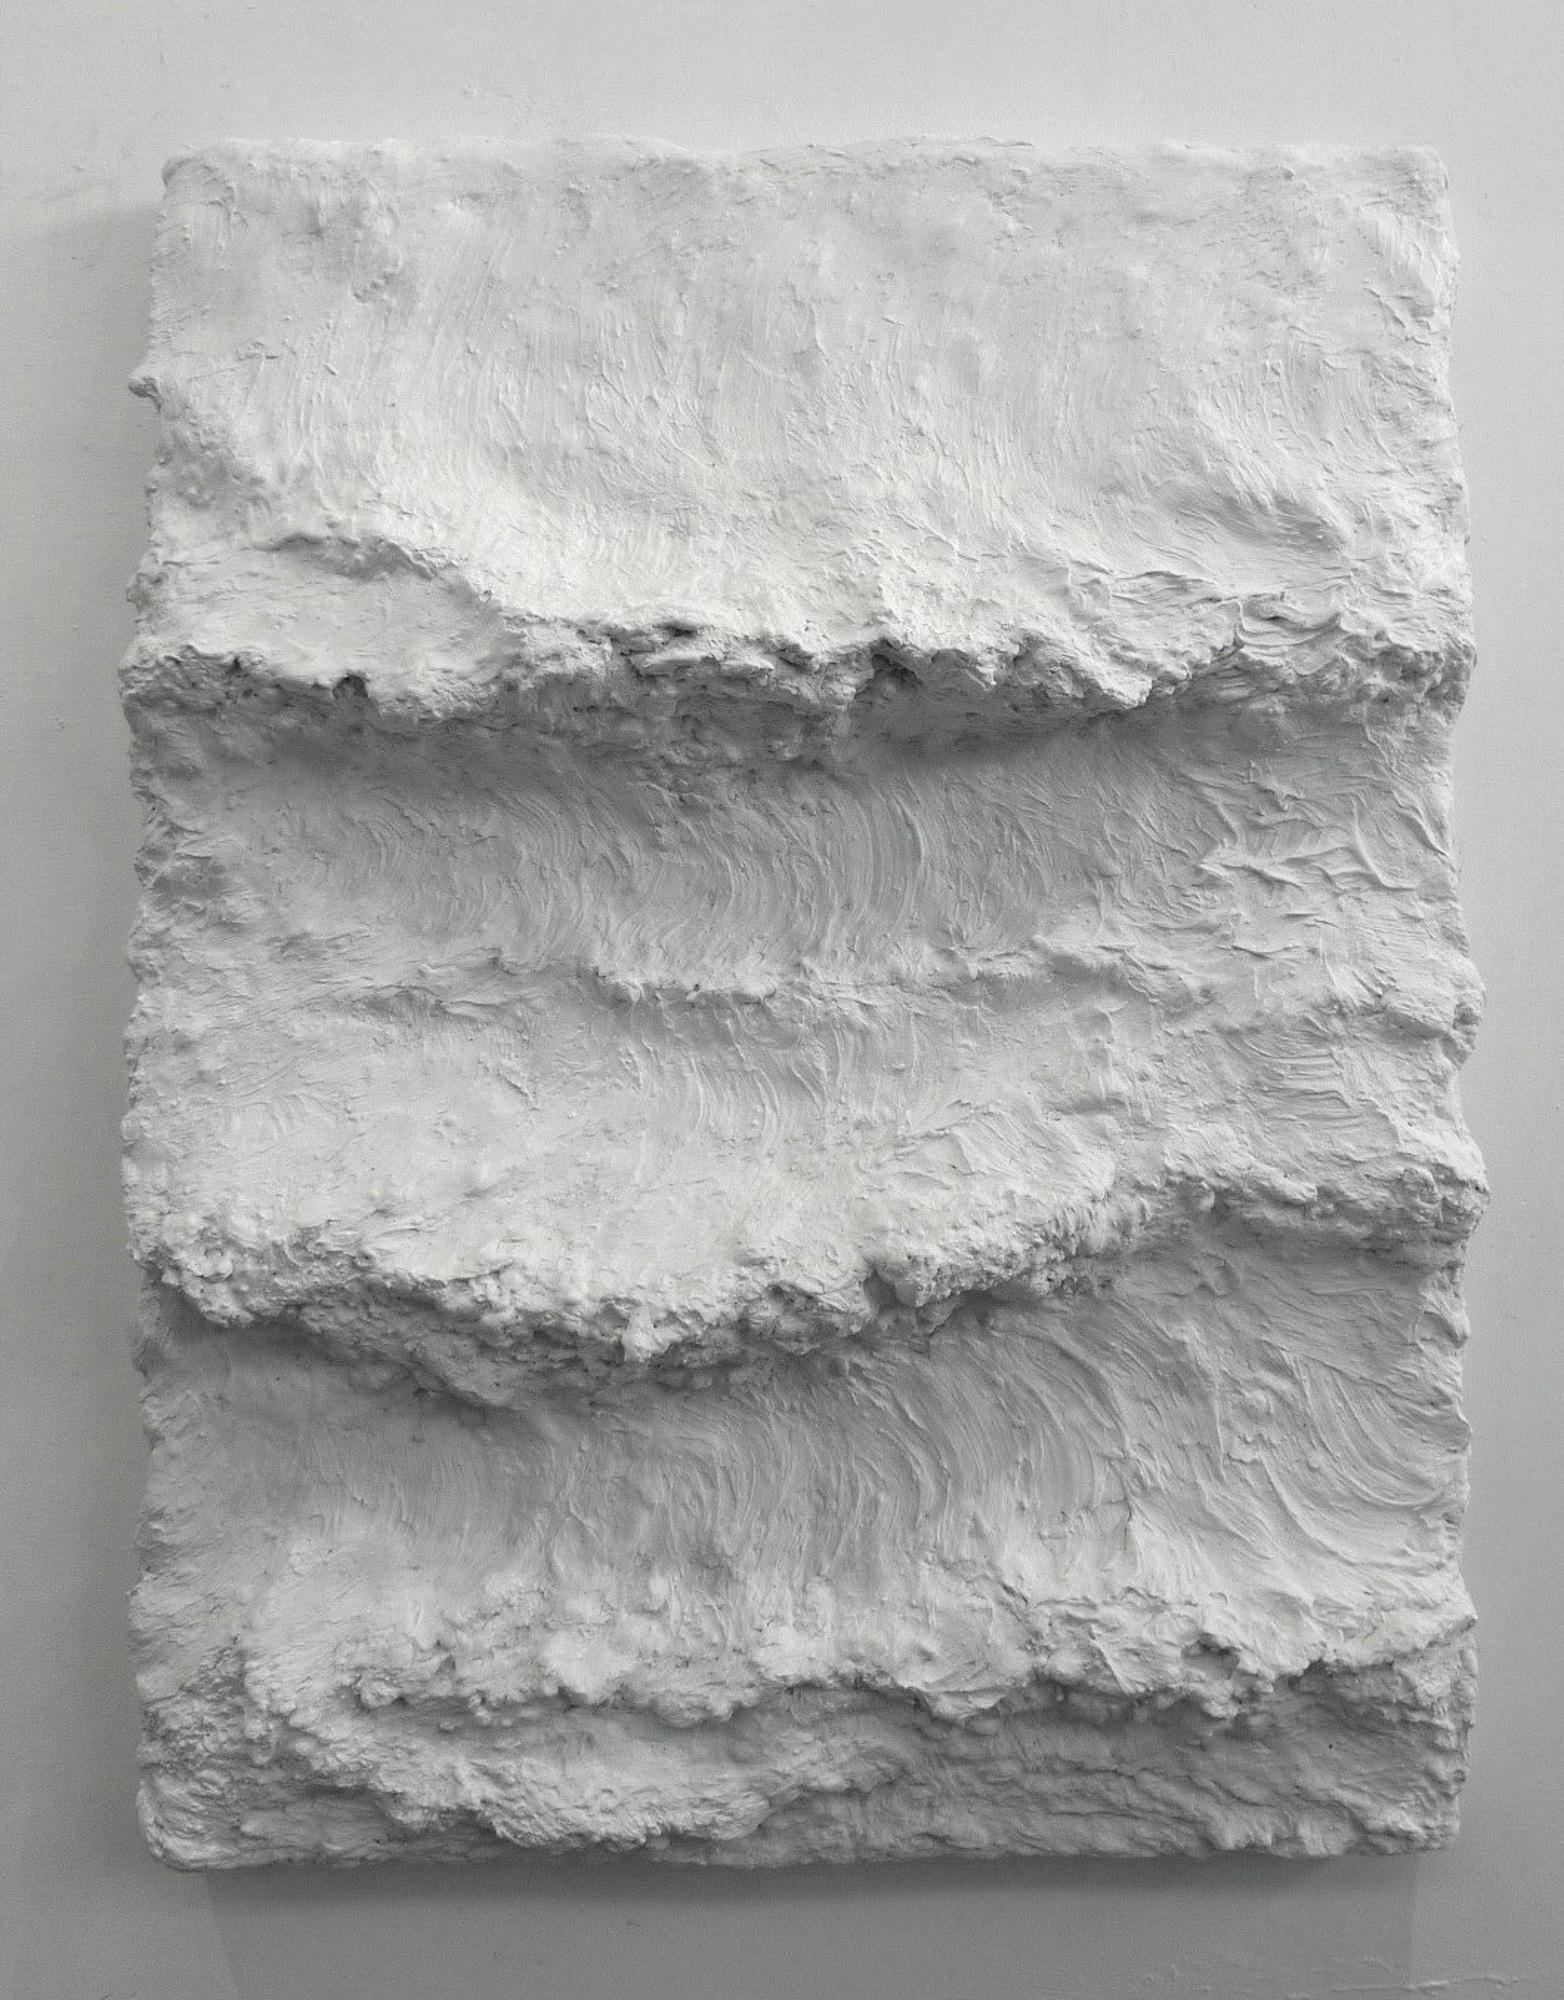 Matter and Spirit is a unique quartz sand, marble powder and binders painting by contemporary artist Franco Salas Borquez, dimensions are 80 × 64 × 10 cm (31.5 × 25.2 × 3.9 in). 
The artwork is signed, sold unframed and comes with a certificate of